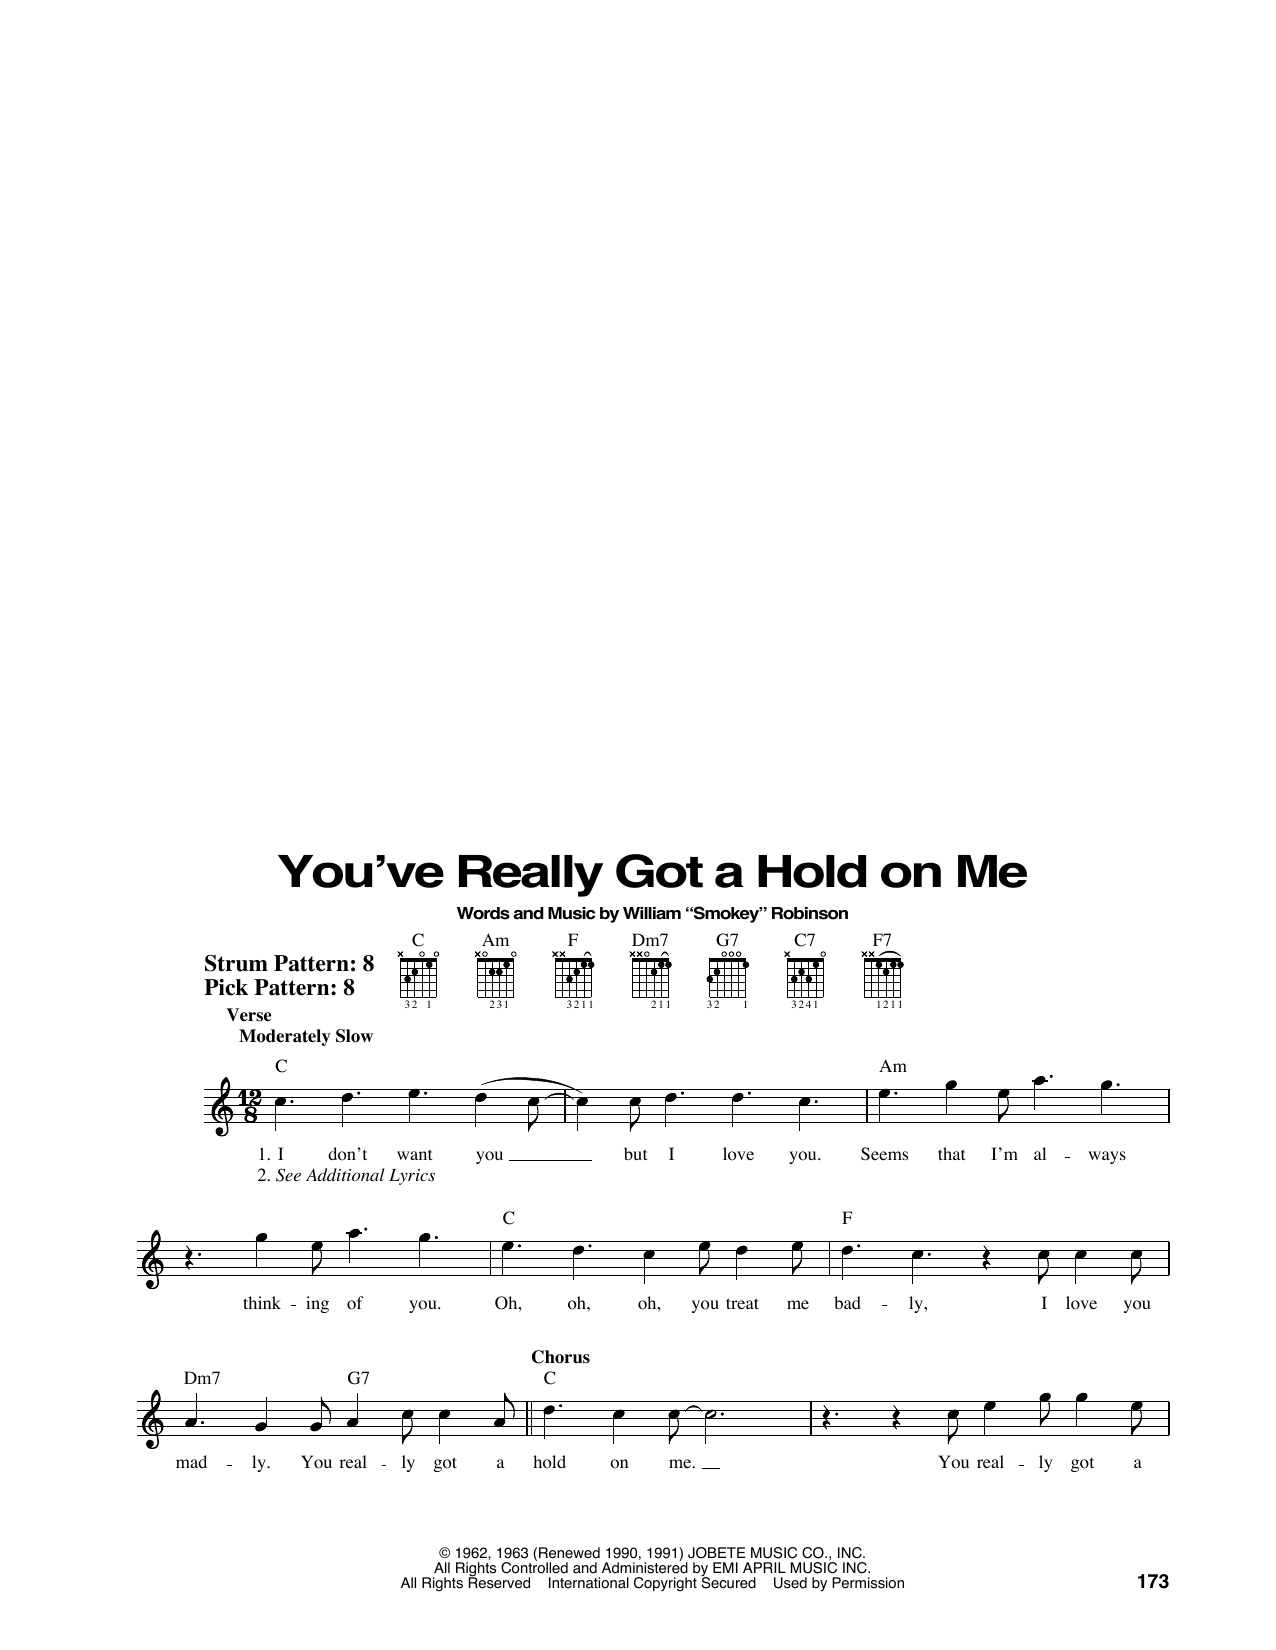 Download The Miracles You've Really Got A Hold On Me Sheet Music